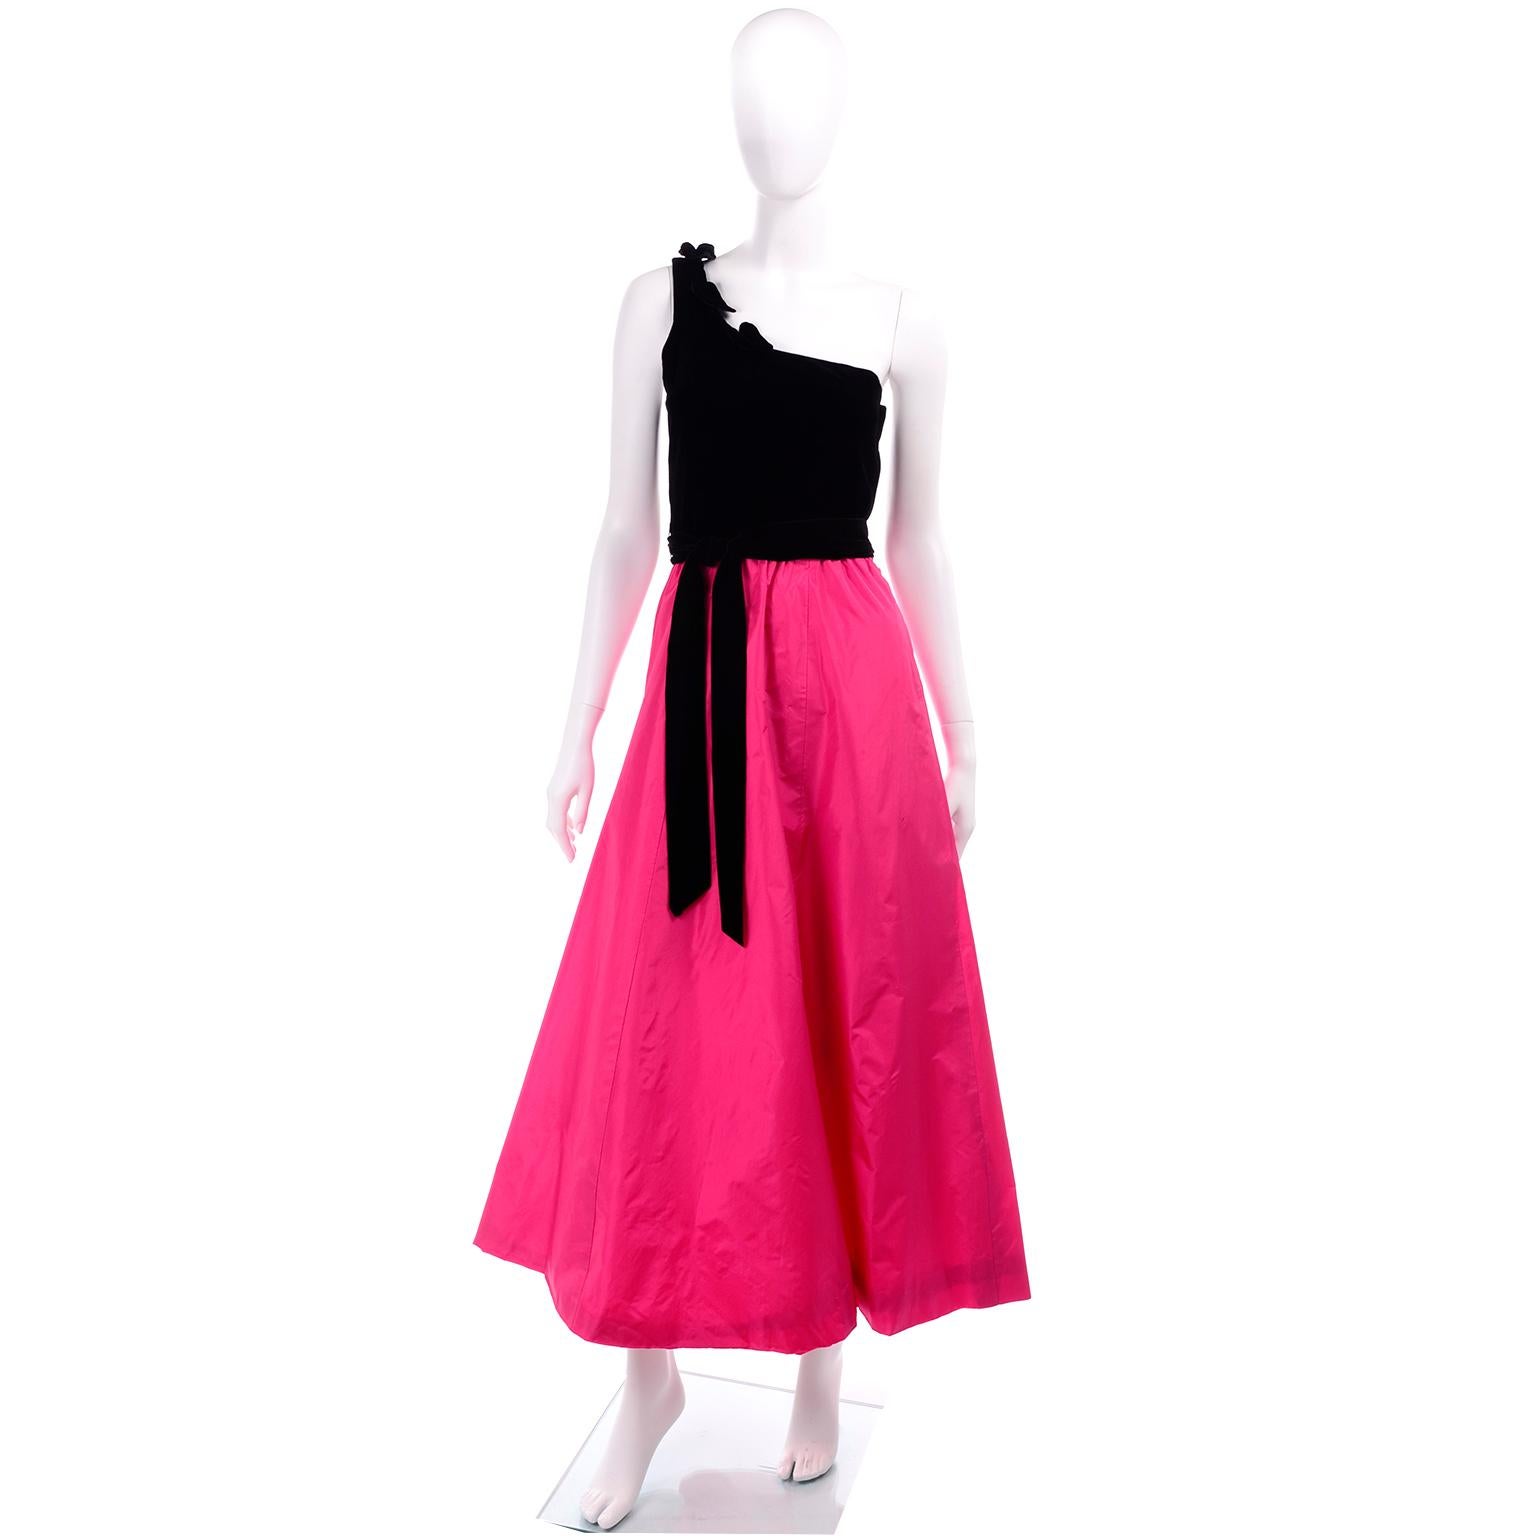 This vintage dress is from the 1980's and it would be perfect for a special evening event!  The dress has a one shoulder black velvet bodice with pretty cut out leaves, and a pretty hot pink taffeta skirt. The dress closes with a metal side zipper